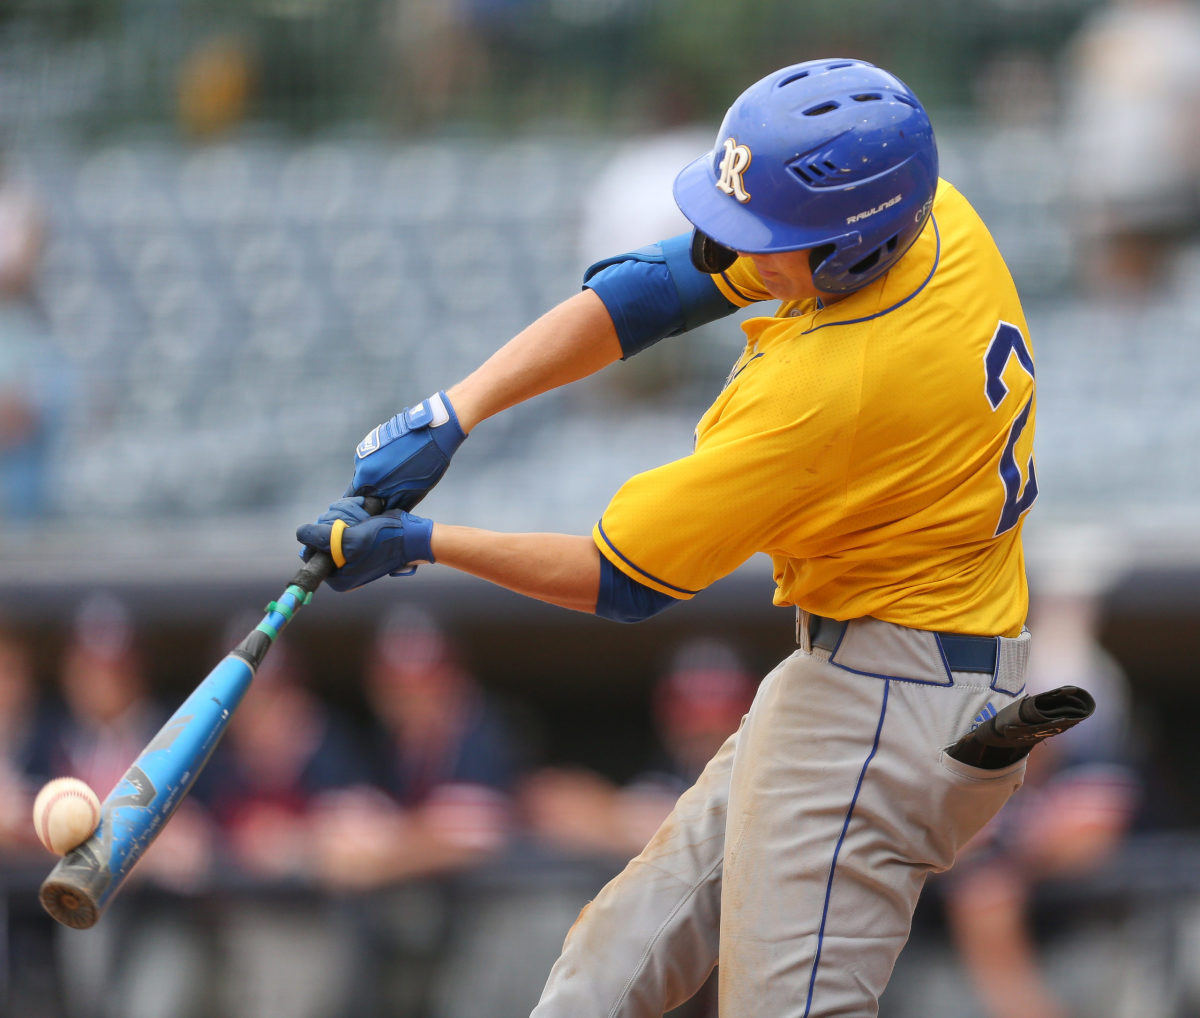 Resurrection's Max Askew (2) makes contact with the baseball. Tupelo Christian and Resurrection played in game 2 of the MHSAA Class 1A Baseball Championship on Thursday, June 3, 2021 at Trustmark Park. Photo by Keith Warren